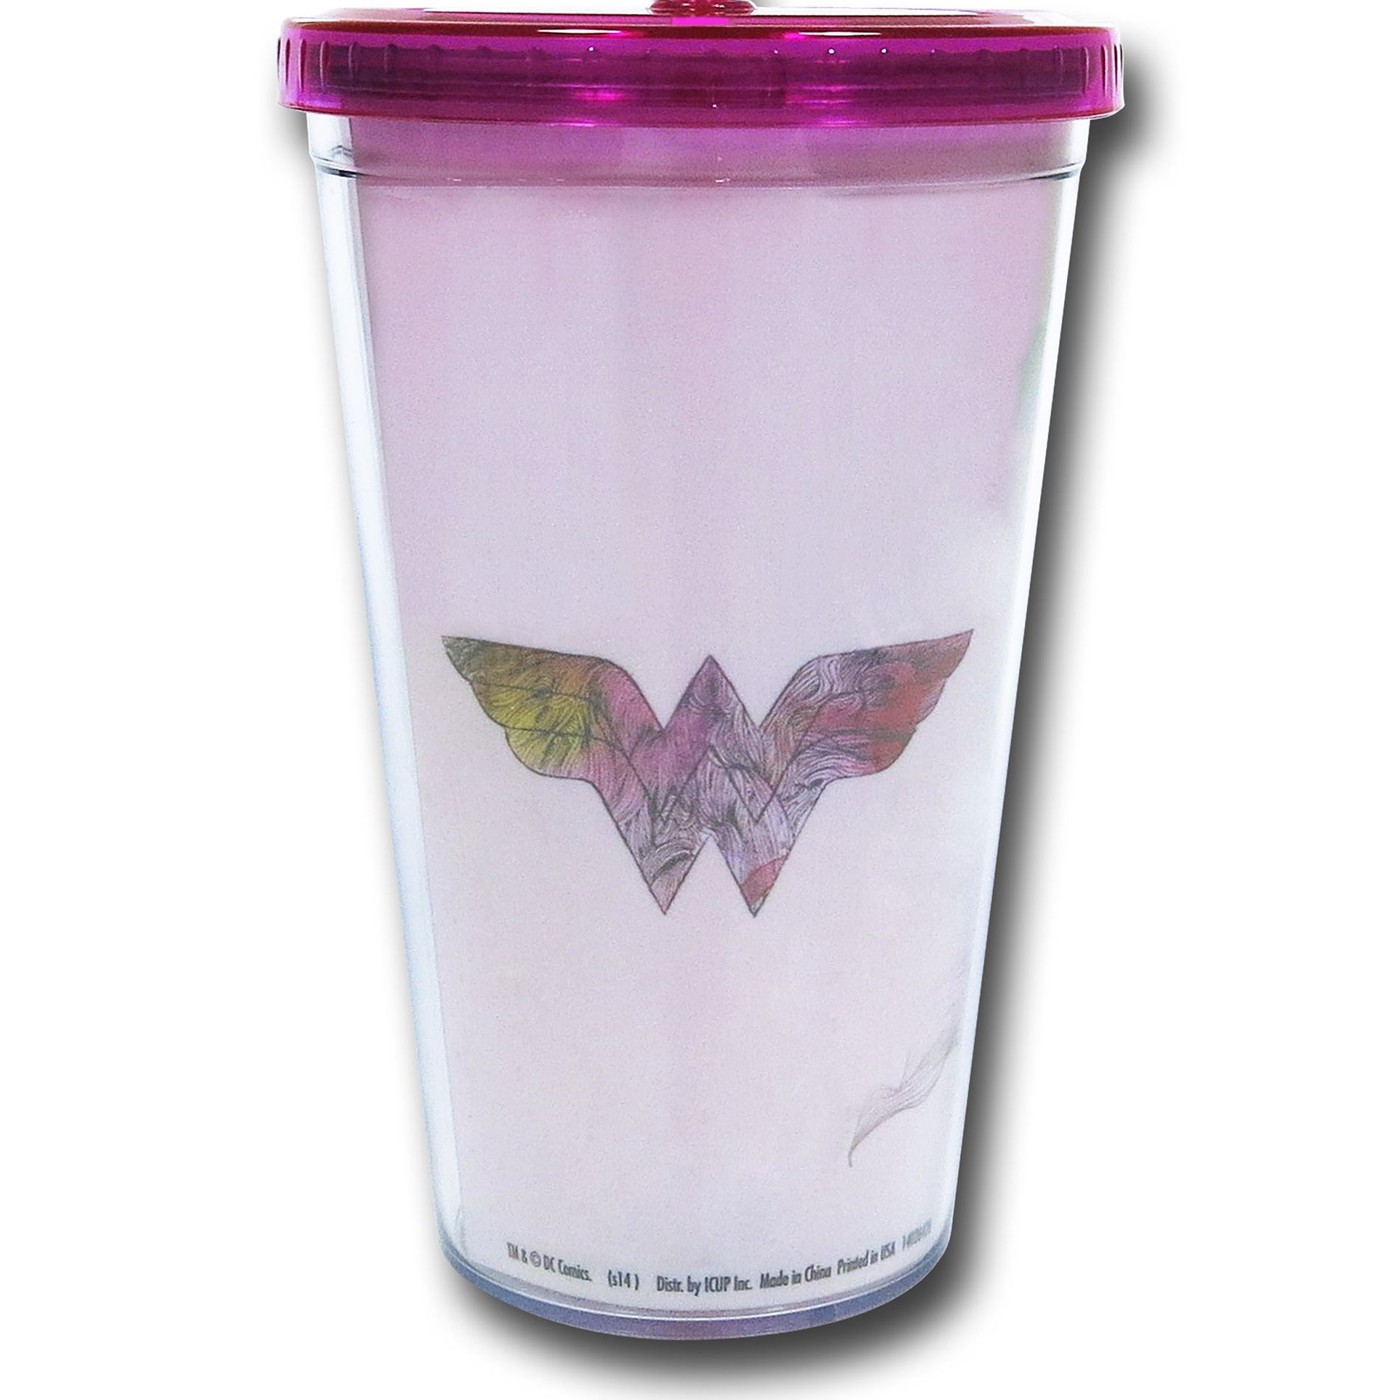 Wonder Woman Sketch Cold Cup With Straw